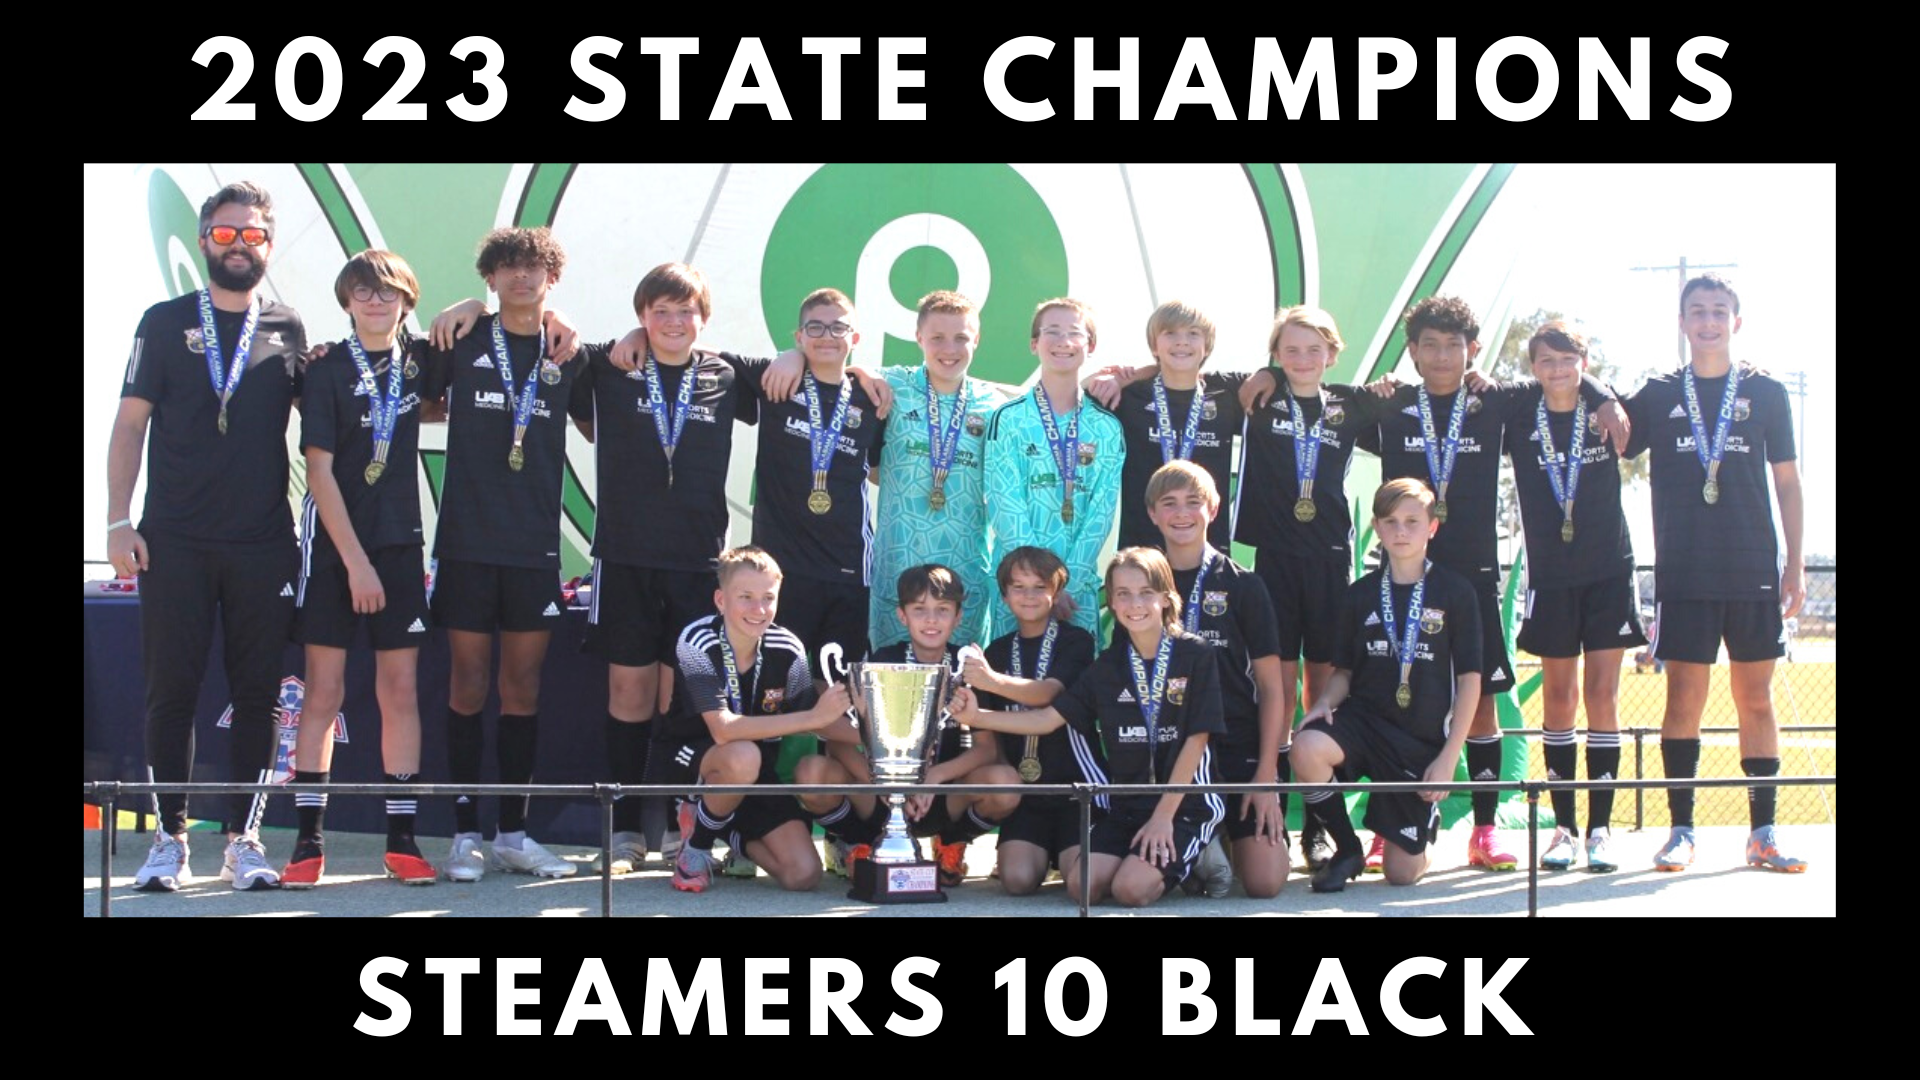 1920x1080 2023 State Champions - Steamers 10 Black